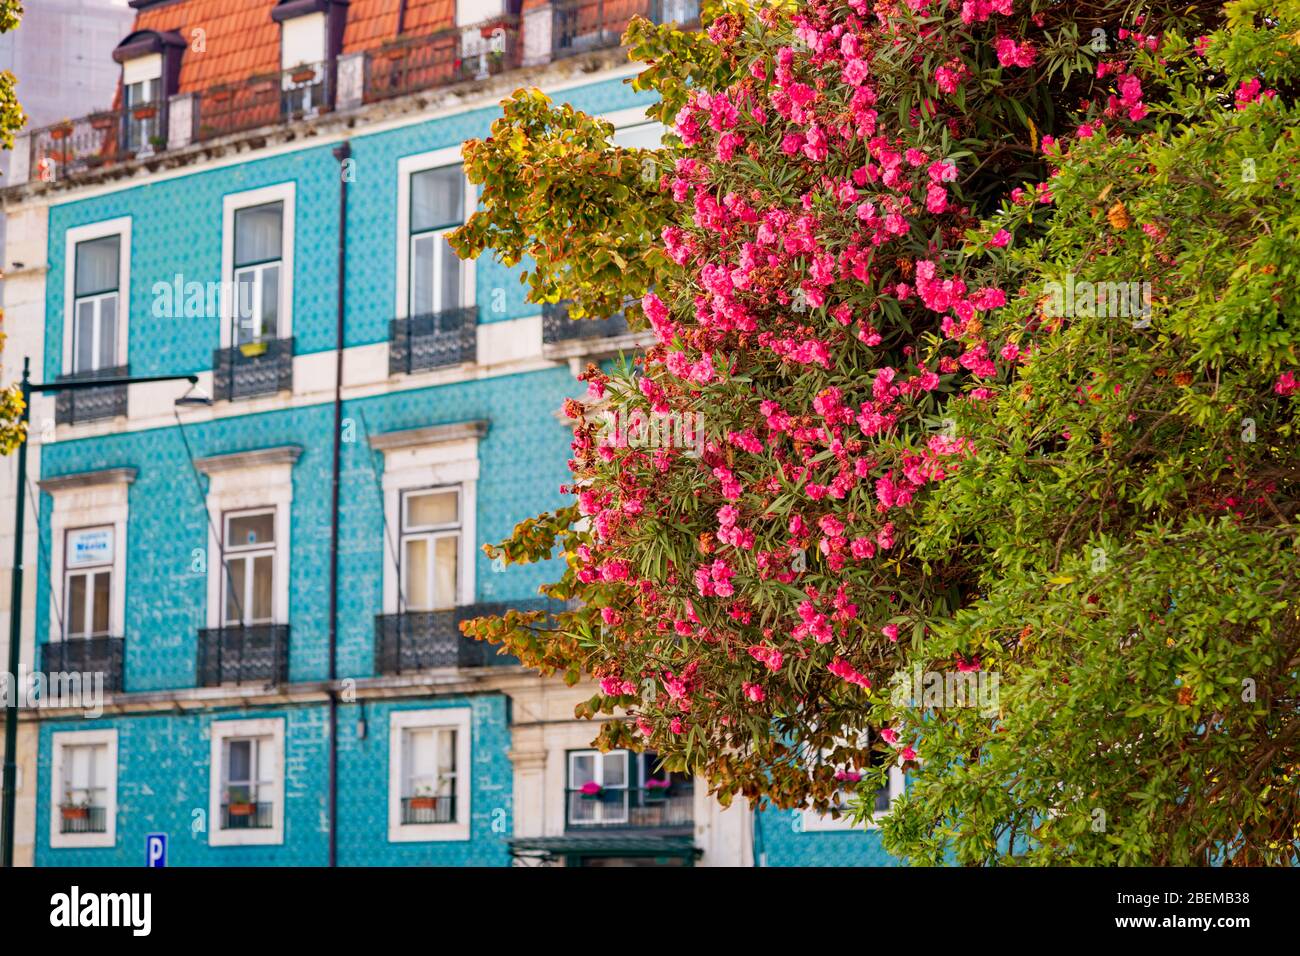 Nerium oleander plant with pink flowers growing in Lisbon old town, Portugal Stock Photo